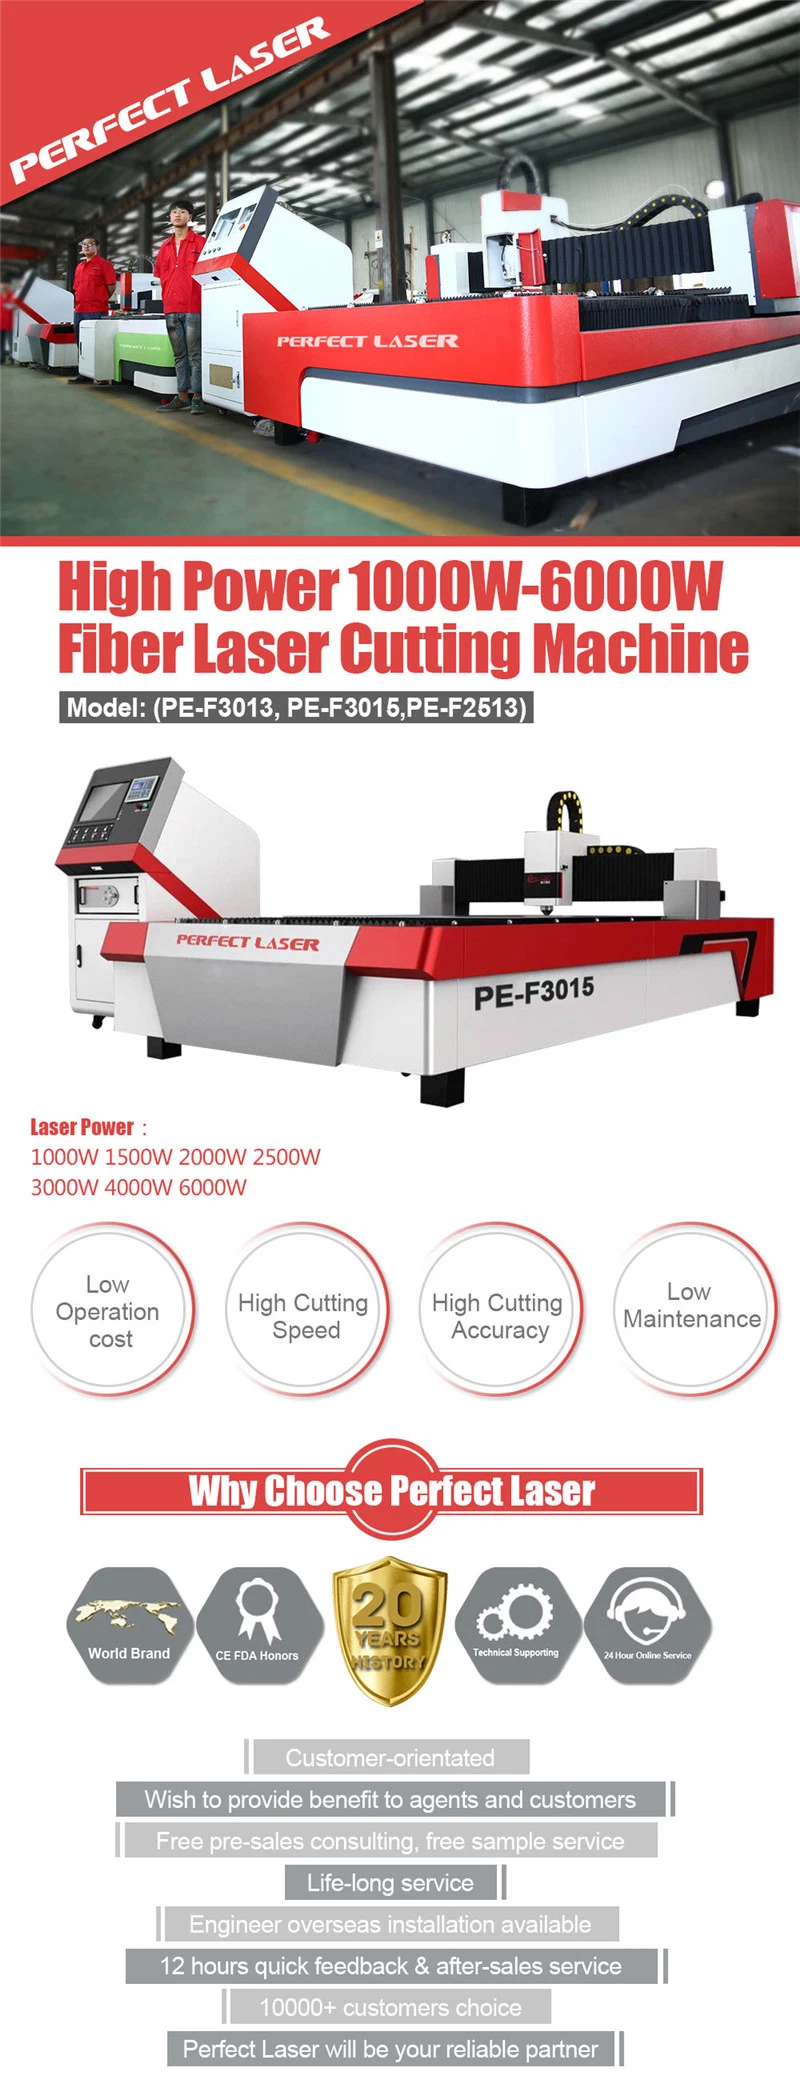 Perfect Laser 1000W High Precision Ss CS Ms CNC Metal Stainless 3teel Laser Cutter Cutting Machine